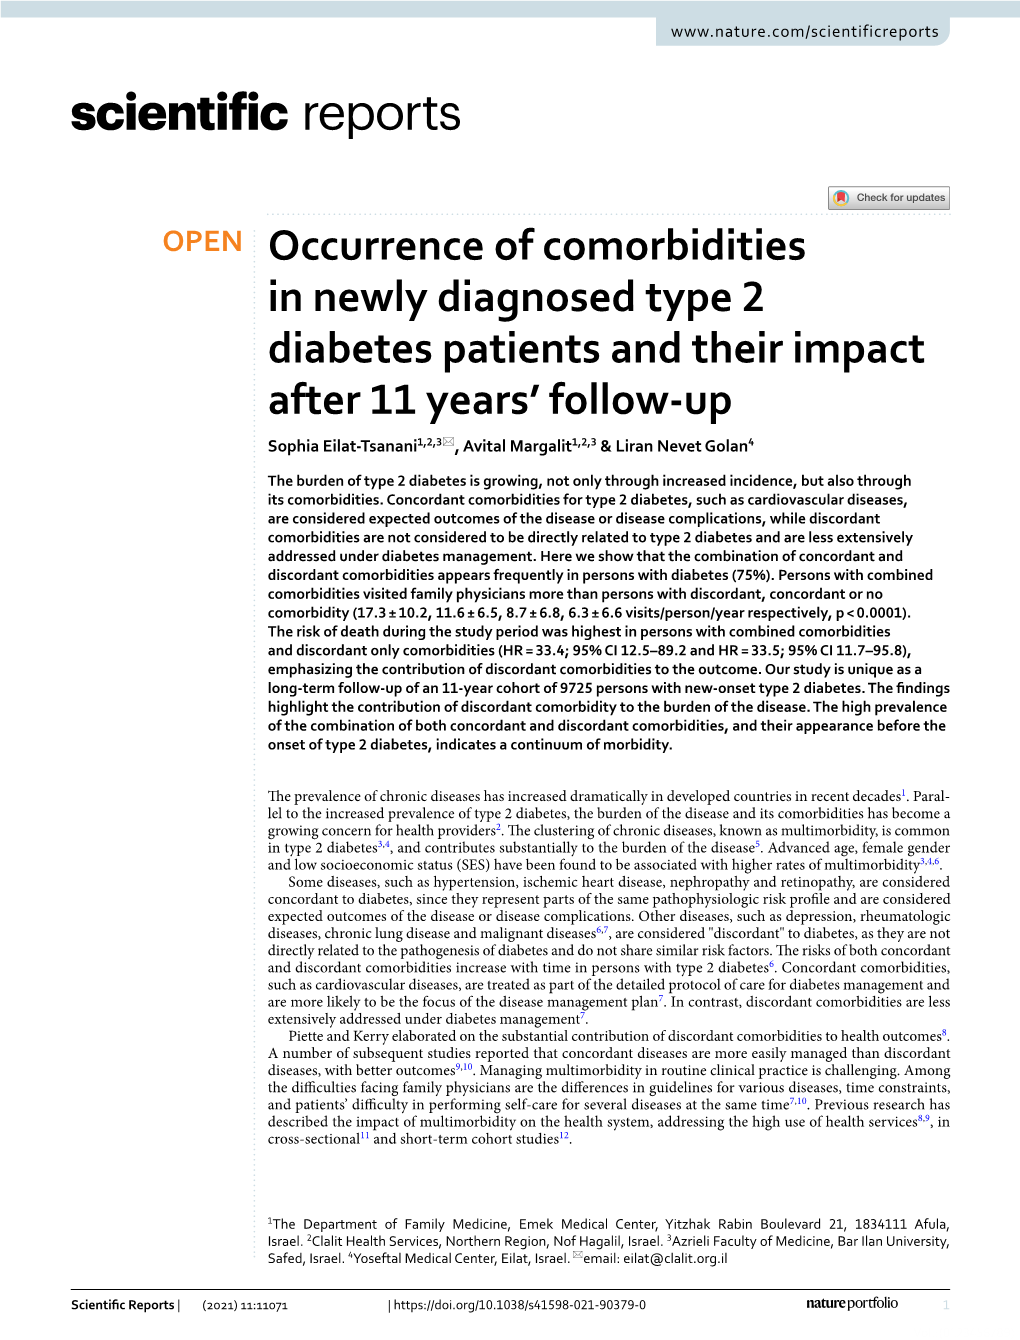 Occurrence of Comorbidities in Newly Diagnosed Type 2 Diabetes Patients